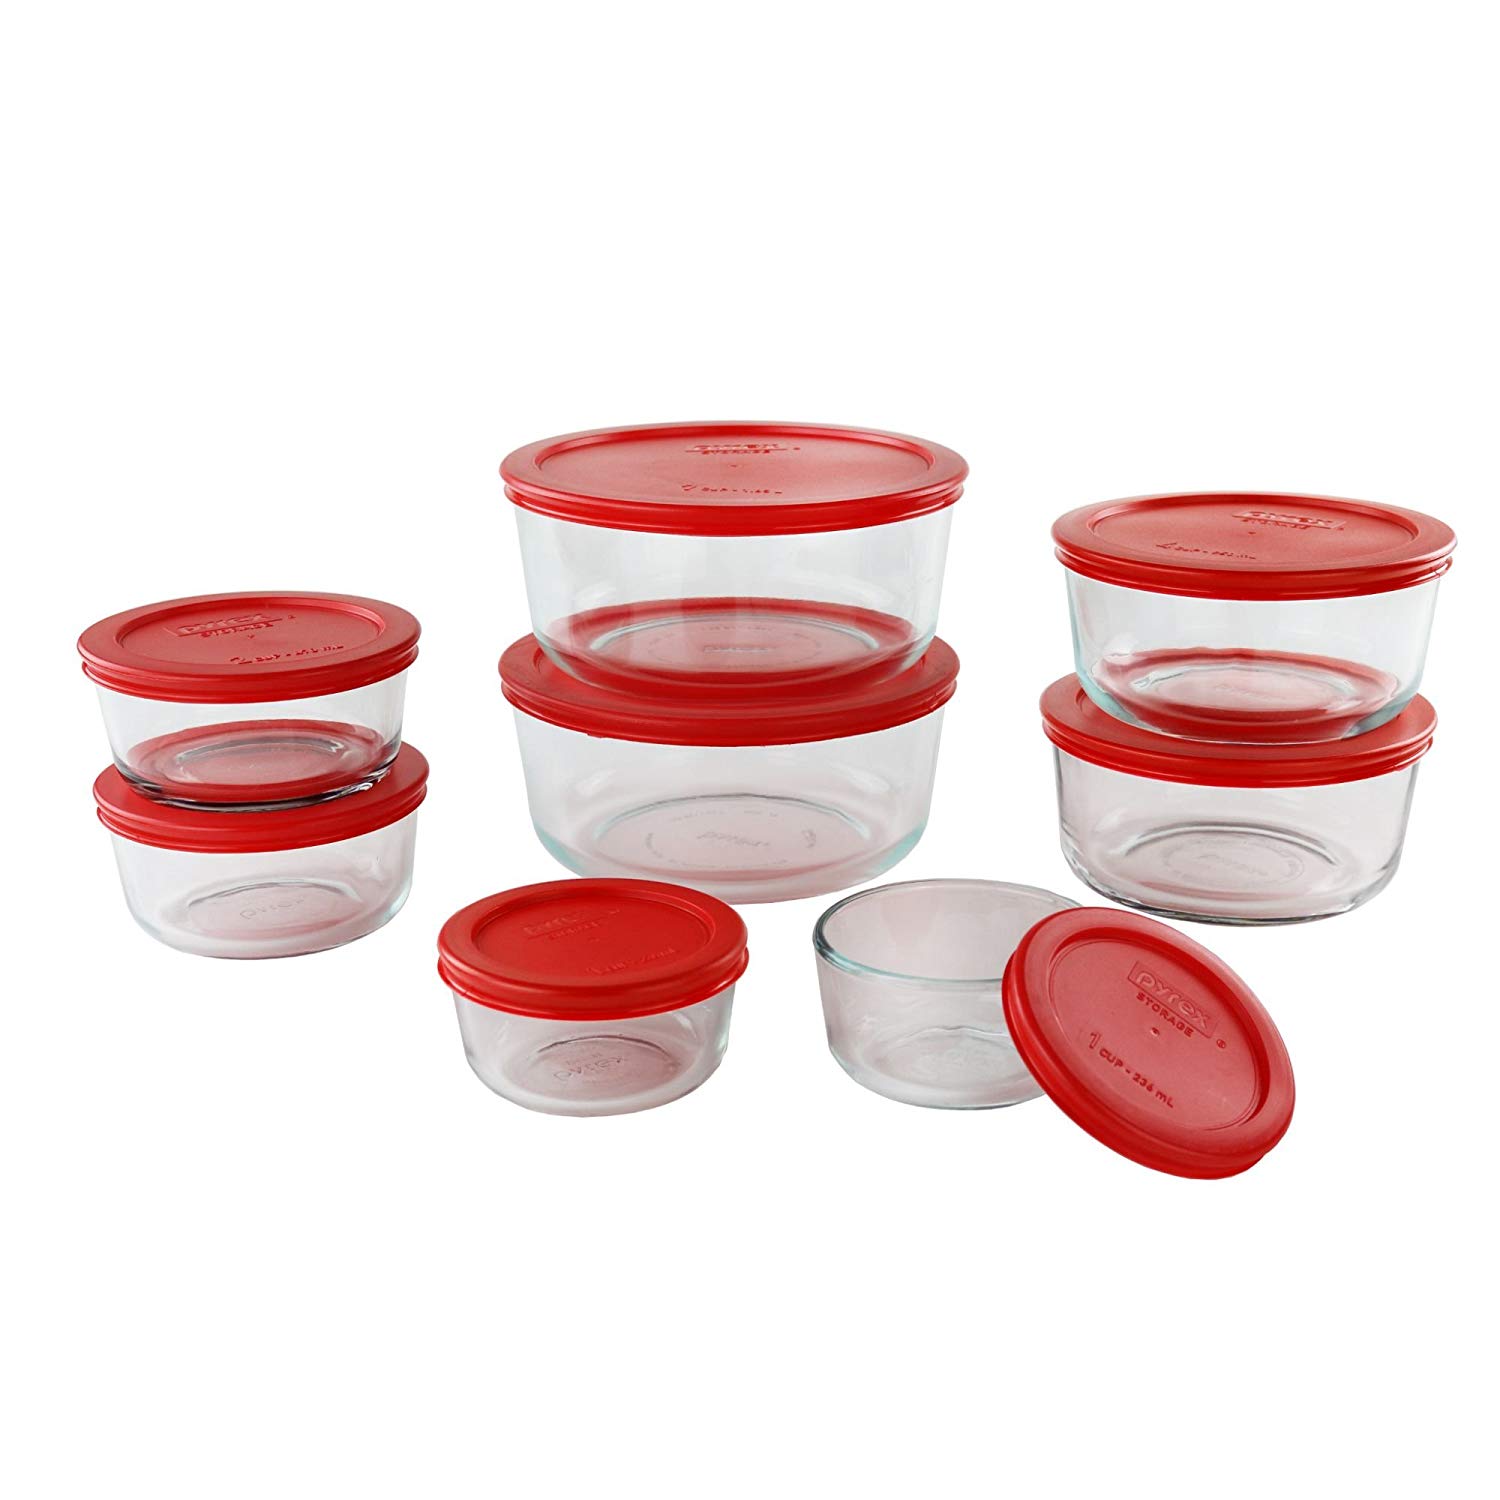 Pyrex Simply Store Glass Round Food Container Set (16 Piece) - Wurth  Organizing